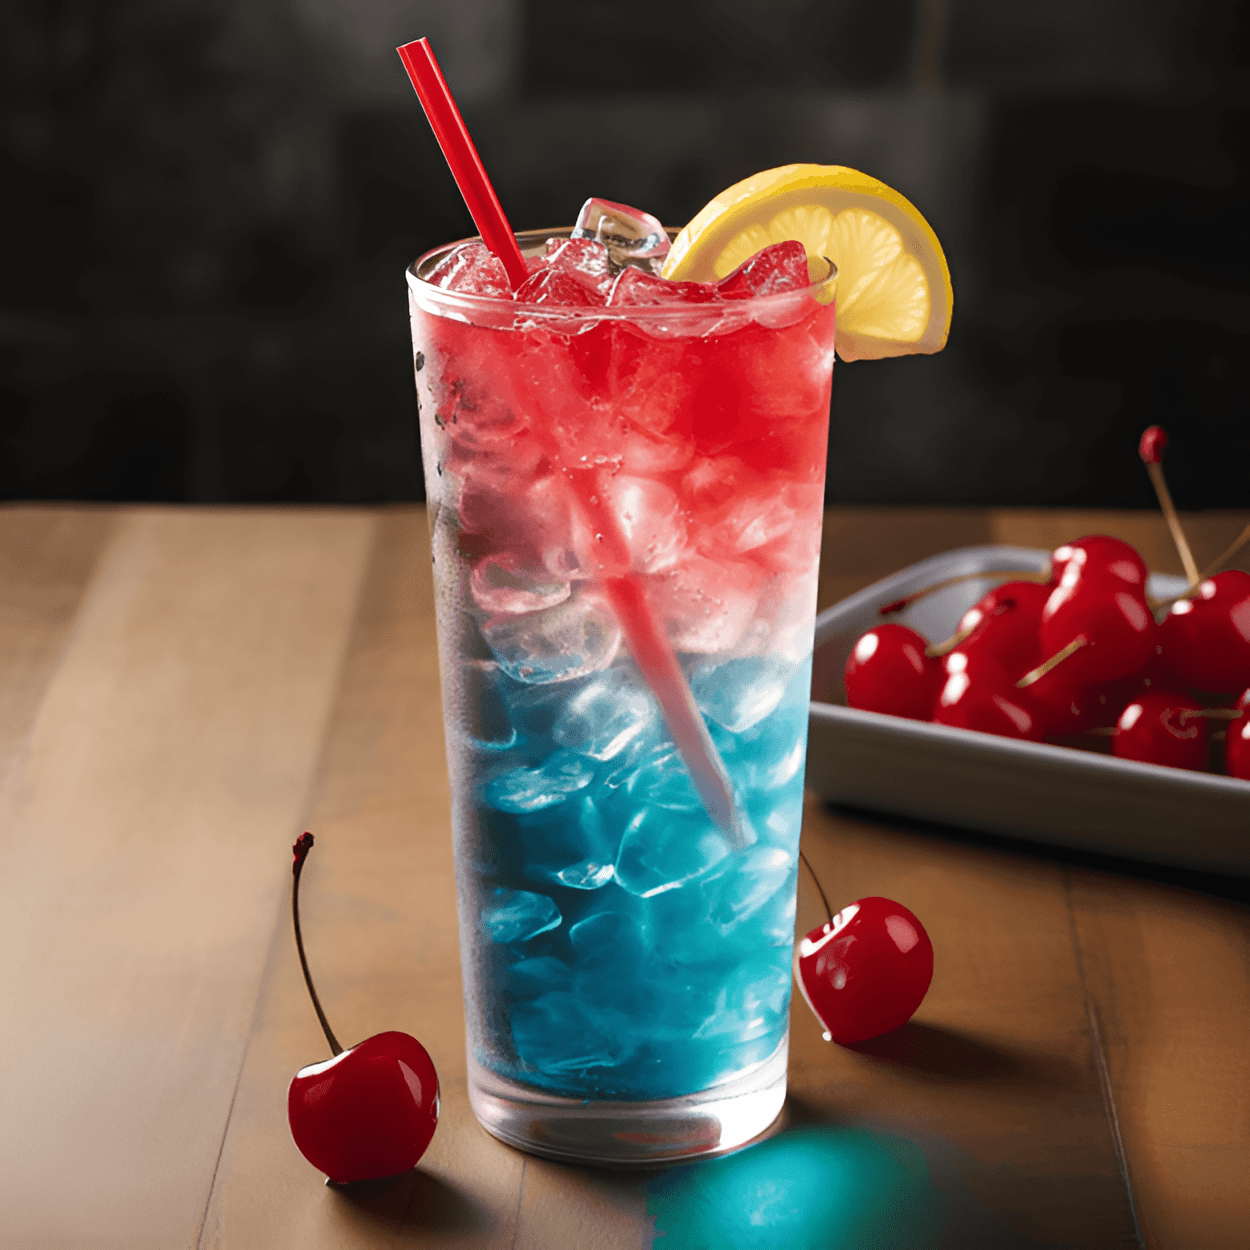 Bomb Pop Cocktail Recipe - The Bomb Pop Cocktail is a sweet and fruity drink with a slightly tart finish. The layers of flavor mimic the popsicle, starting with a cherry sweetness, transitioning to a tart lemon, and finishing with a refreshing blue raspberry.